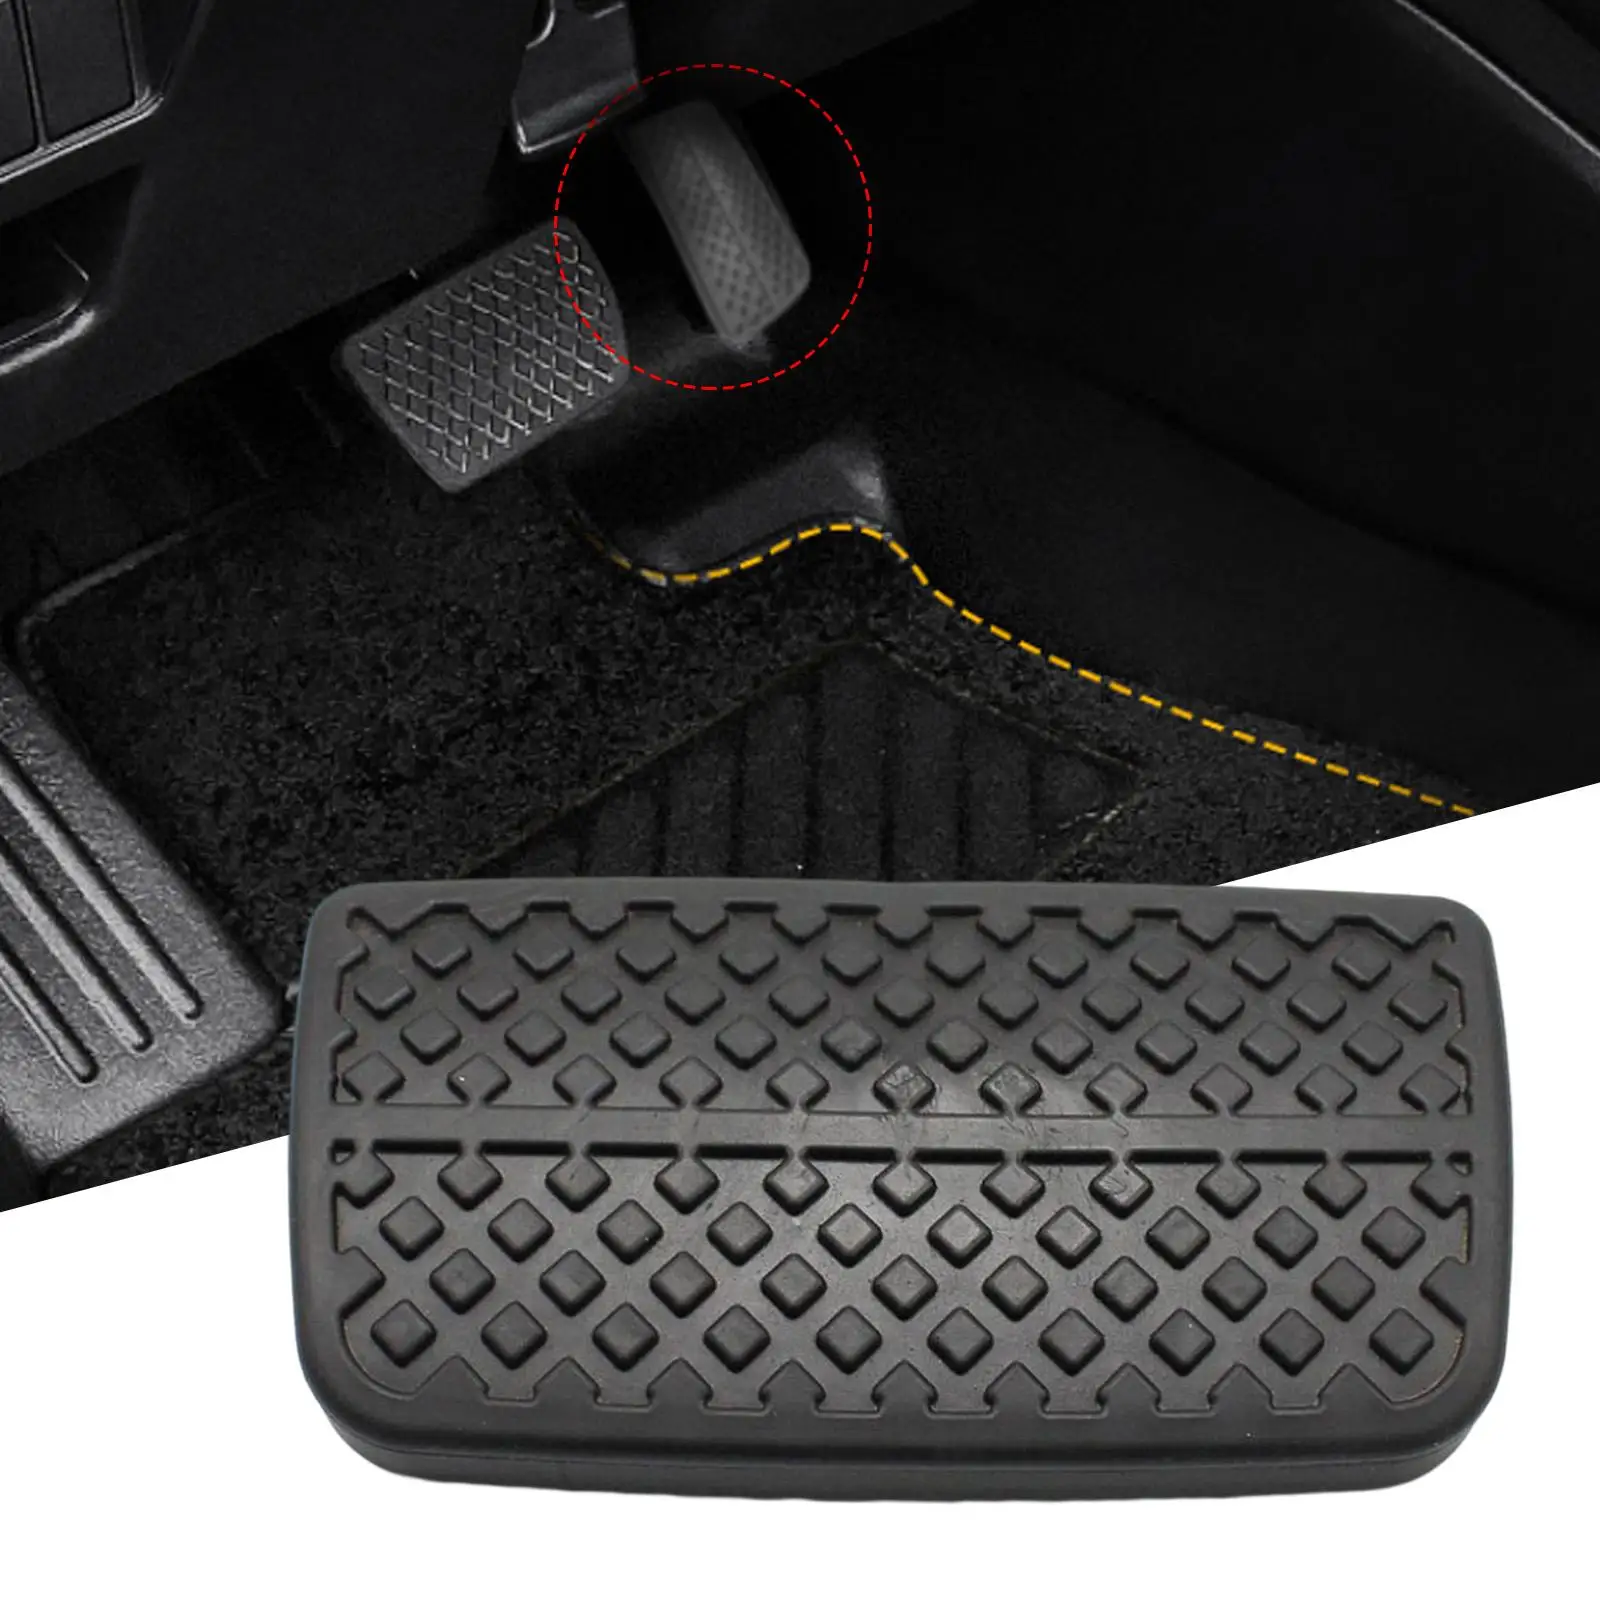 Car Rubber Brake Pedal Cover 46545-s1F-981 replacements for Honda Fit Jazz